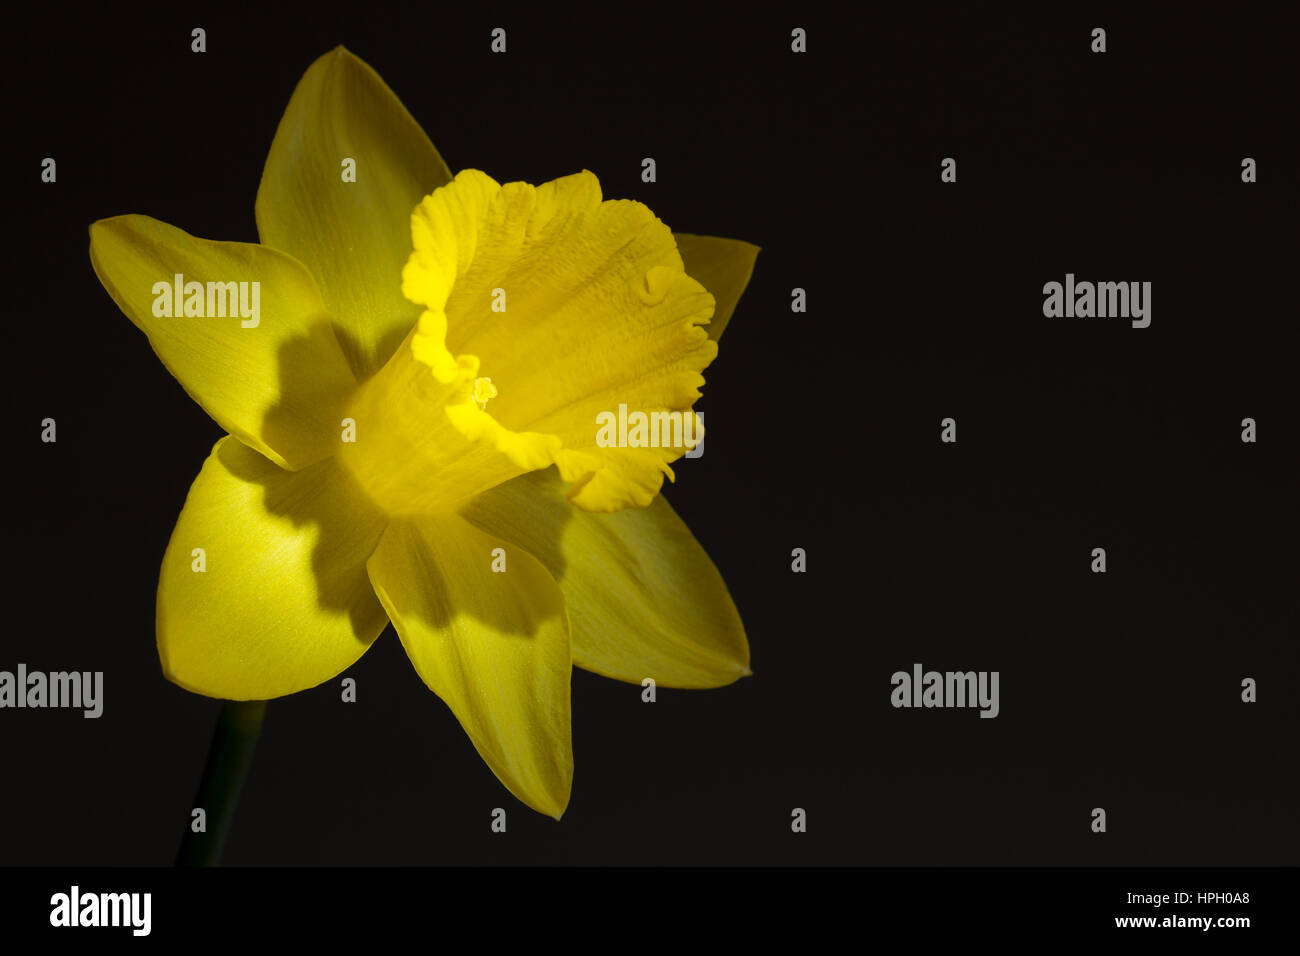 Close up image of yellow daffodil with directional lighting Stock Photo